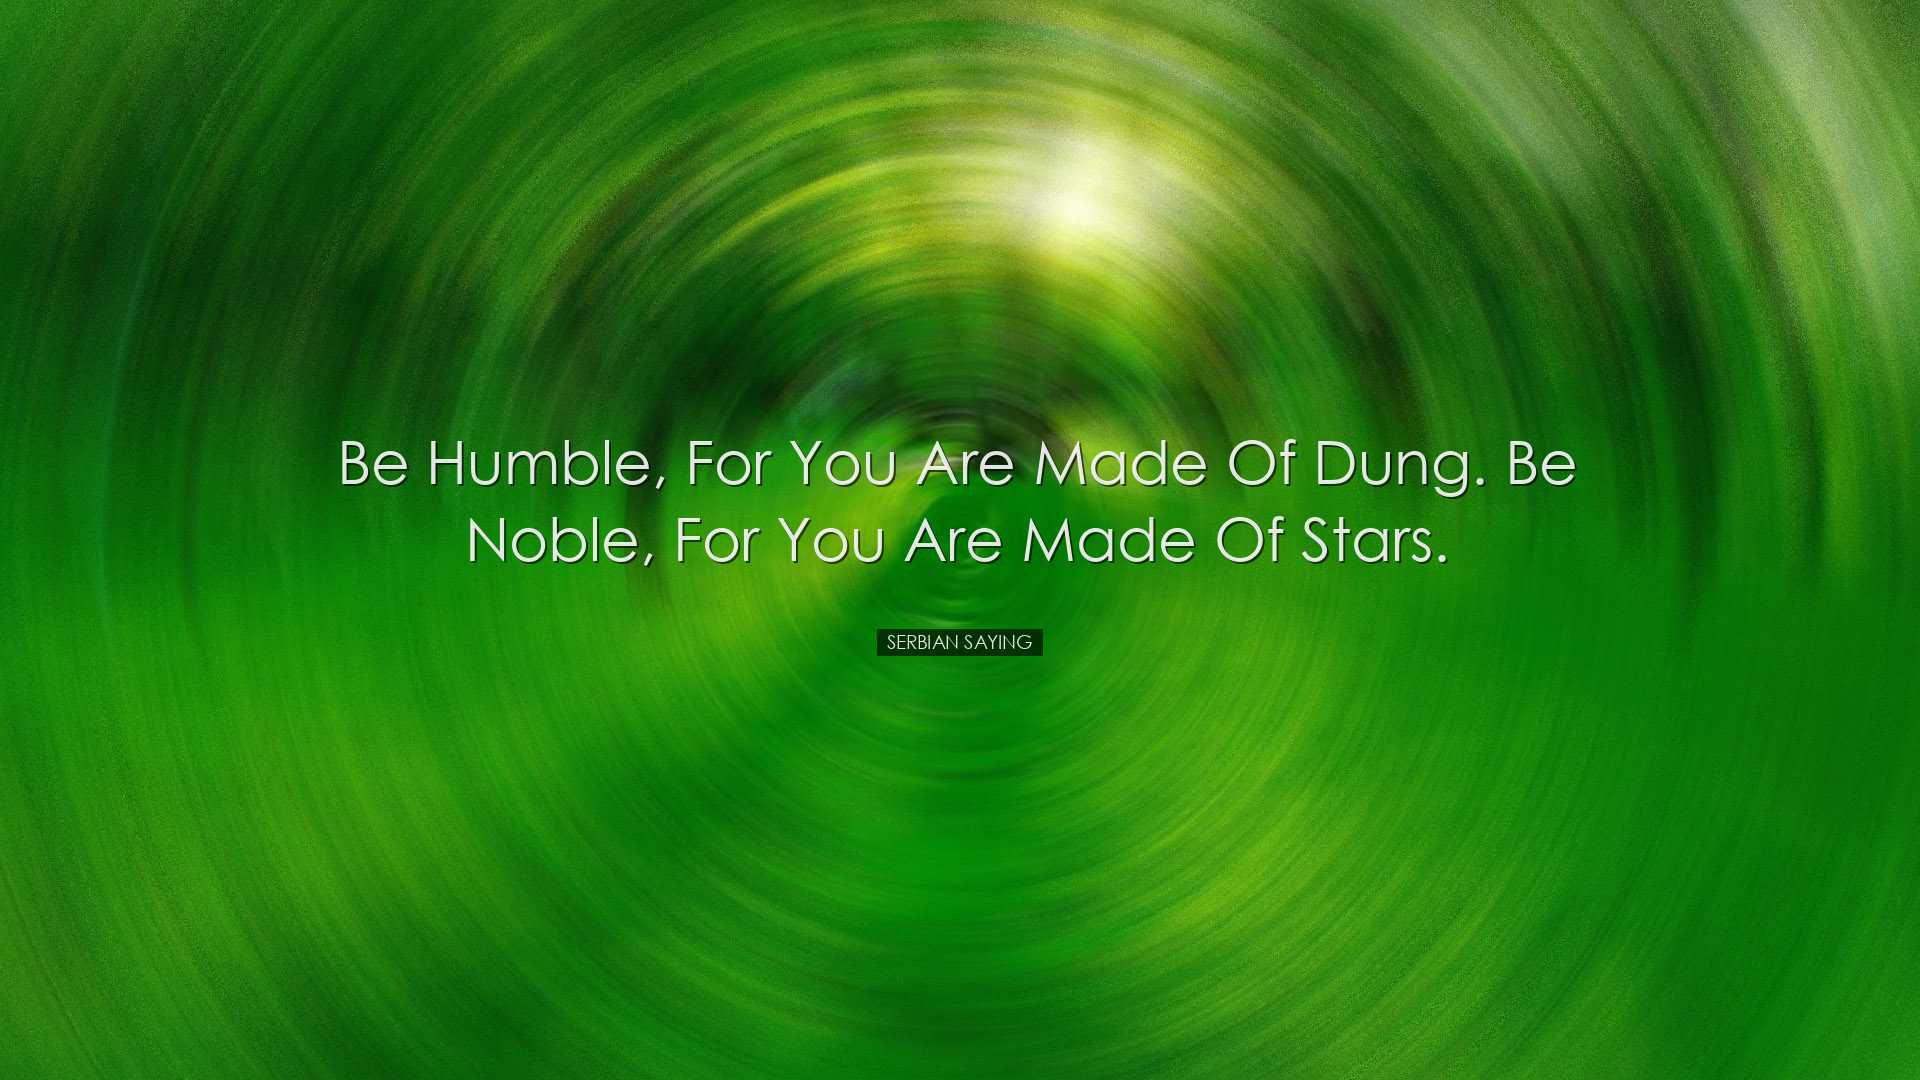 Be humble, for you are made of dung. Be noble, for you are made of